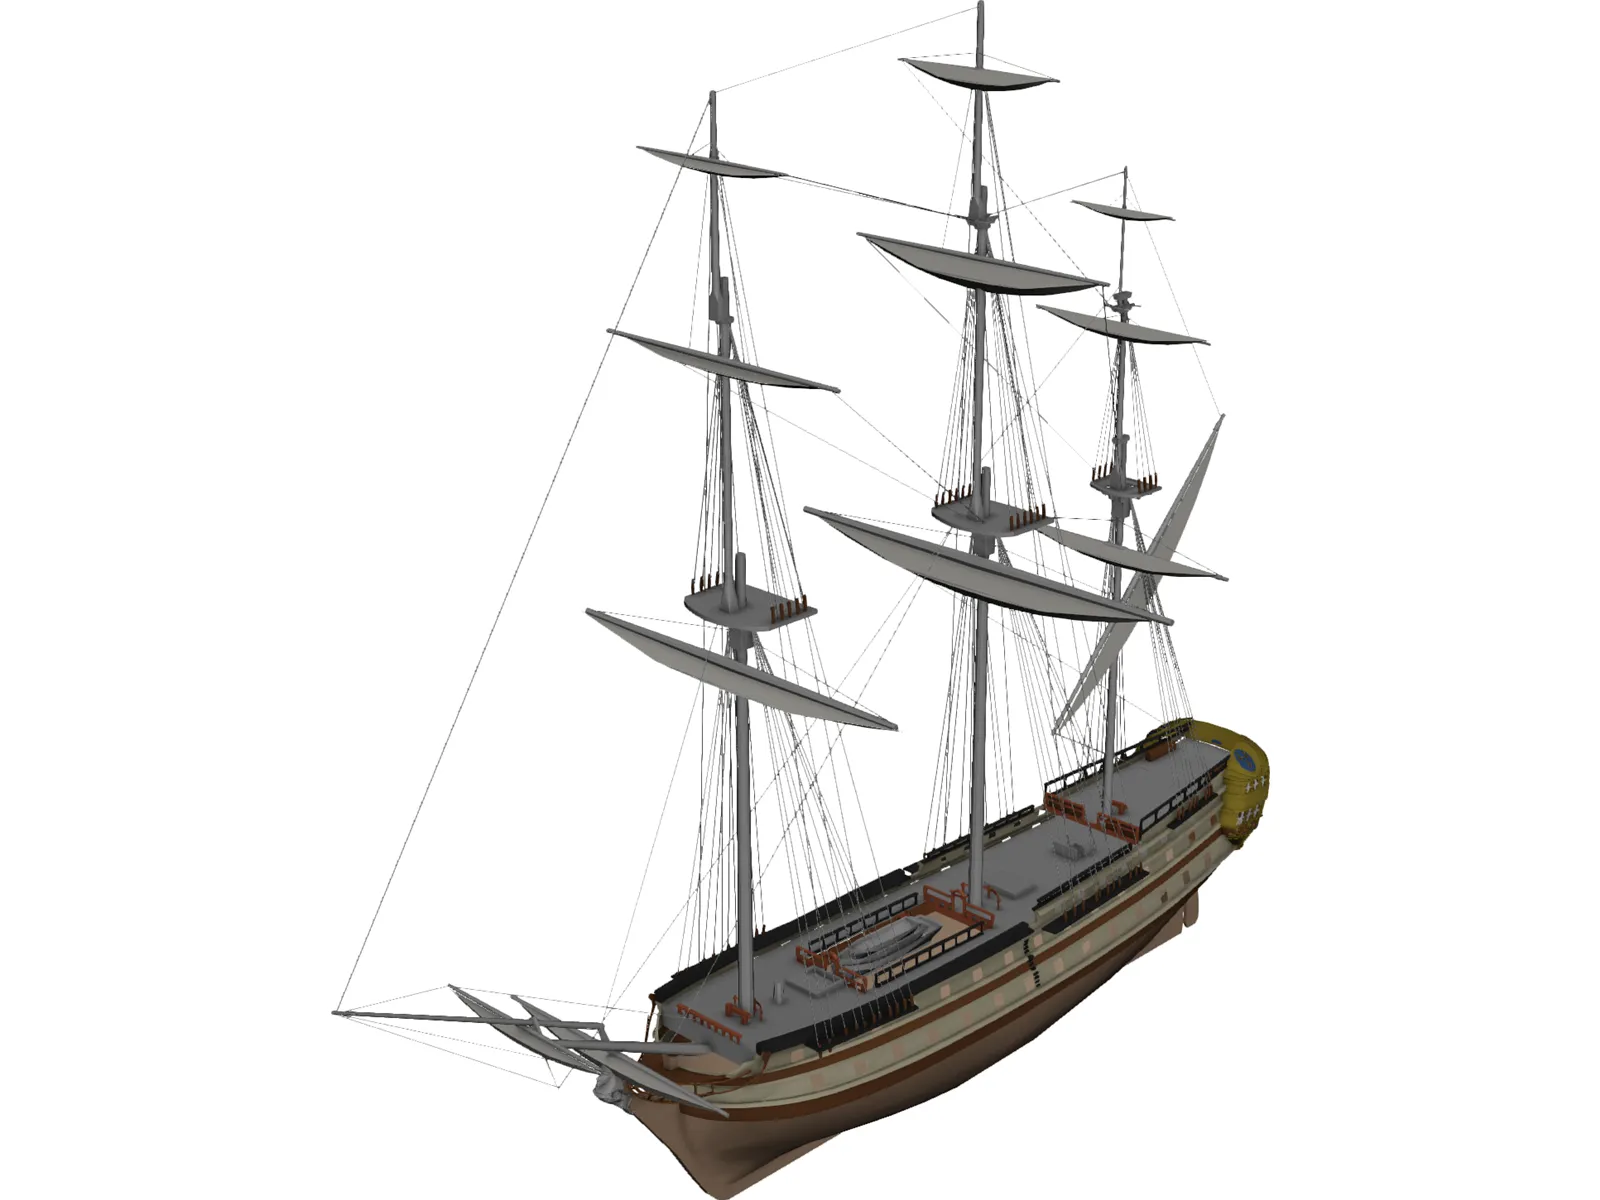 Glorieux French Ship 3D Model